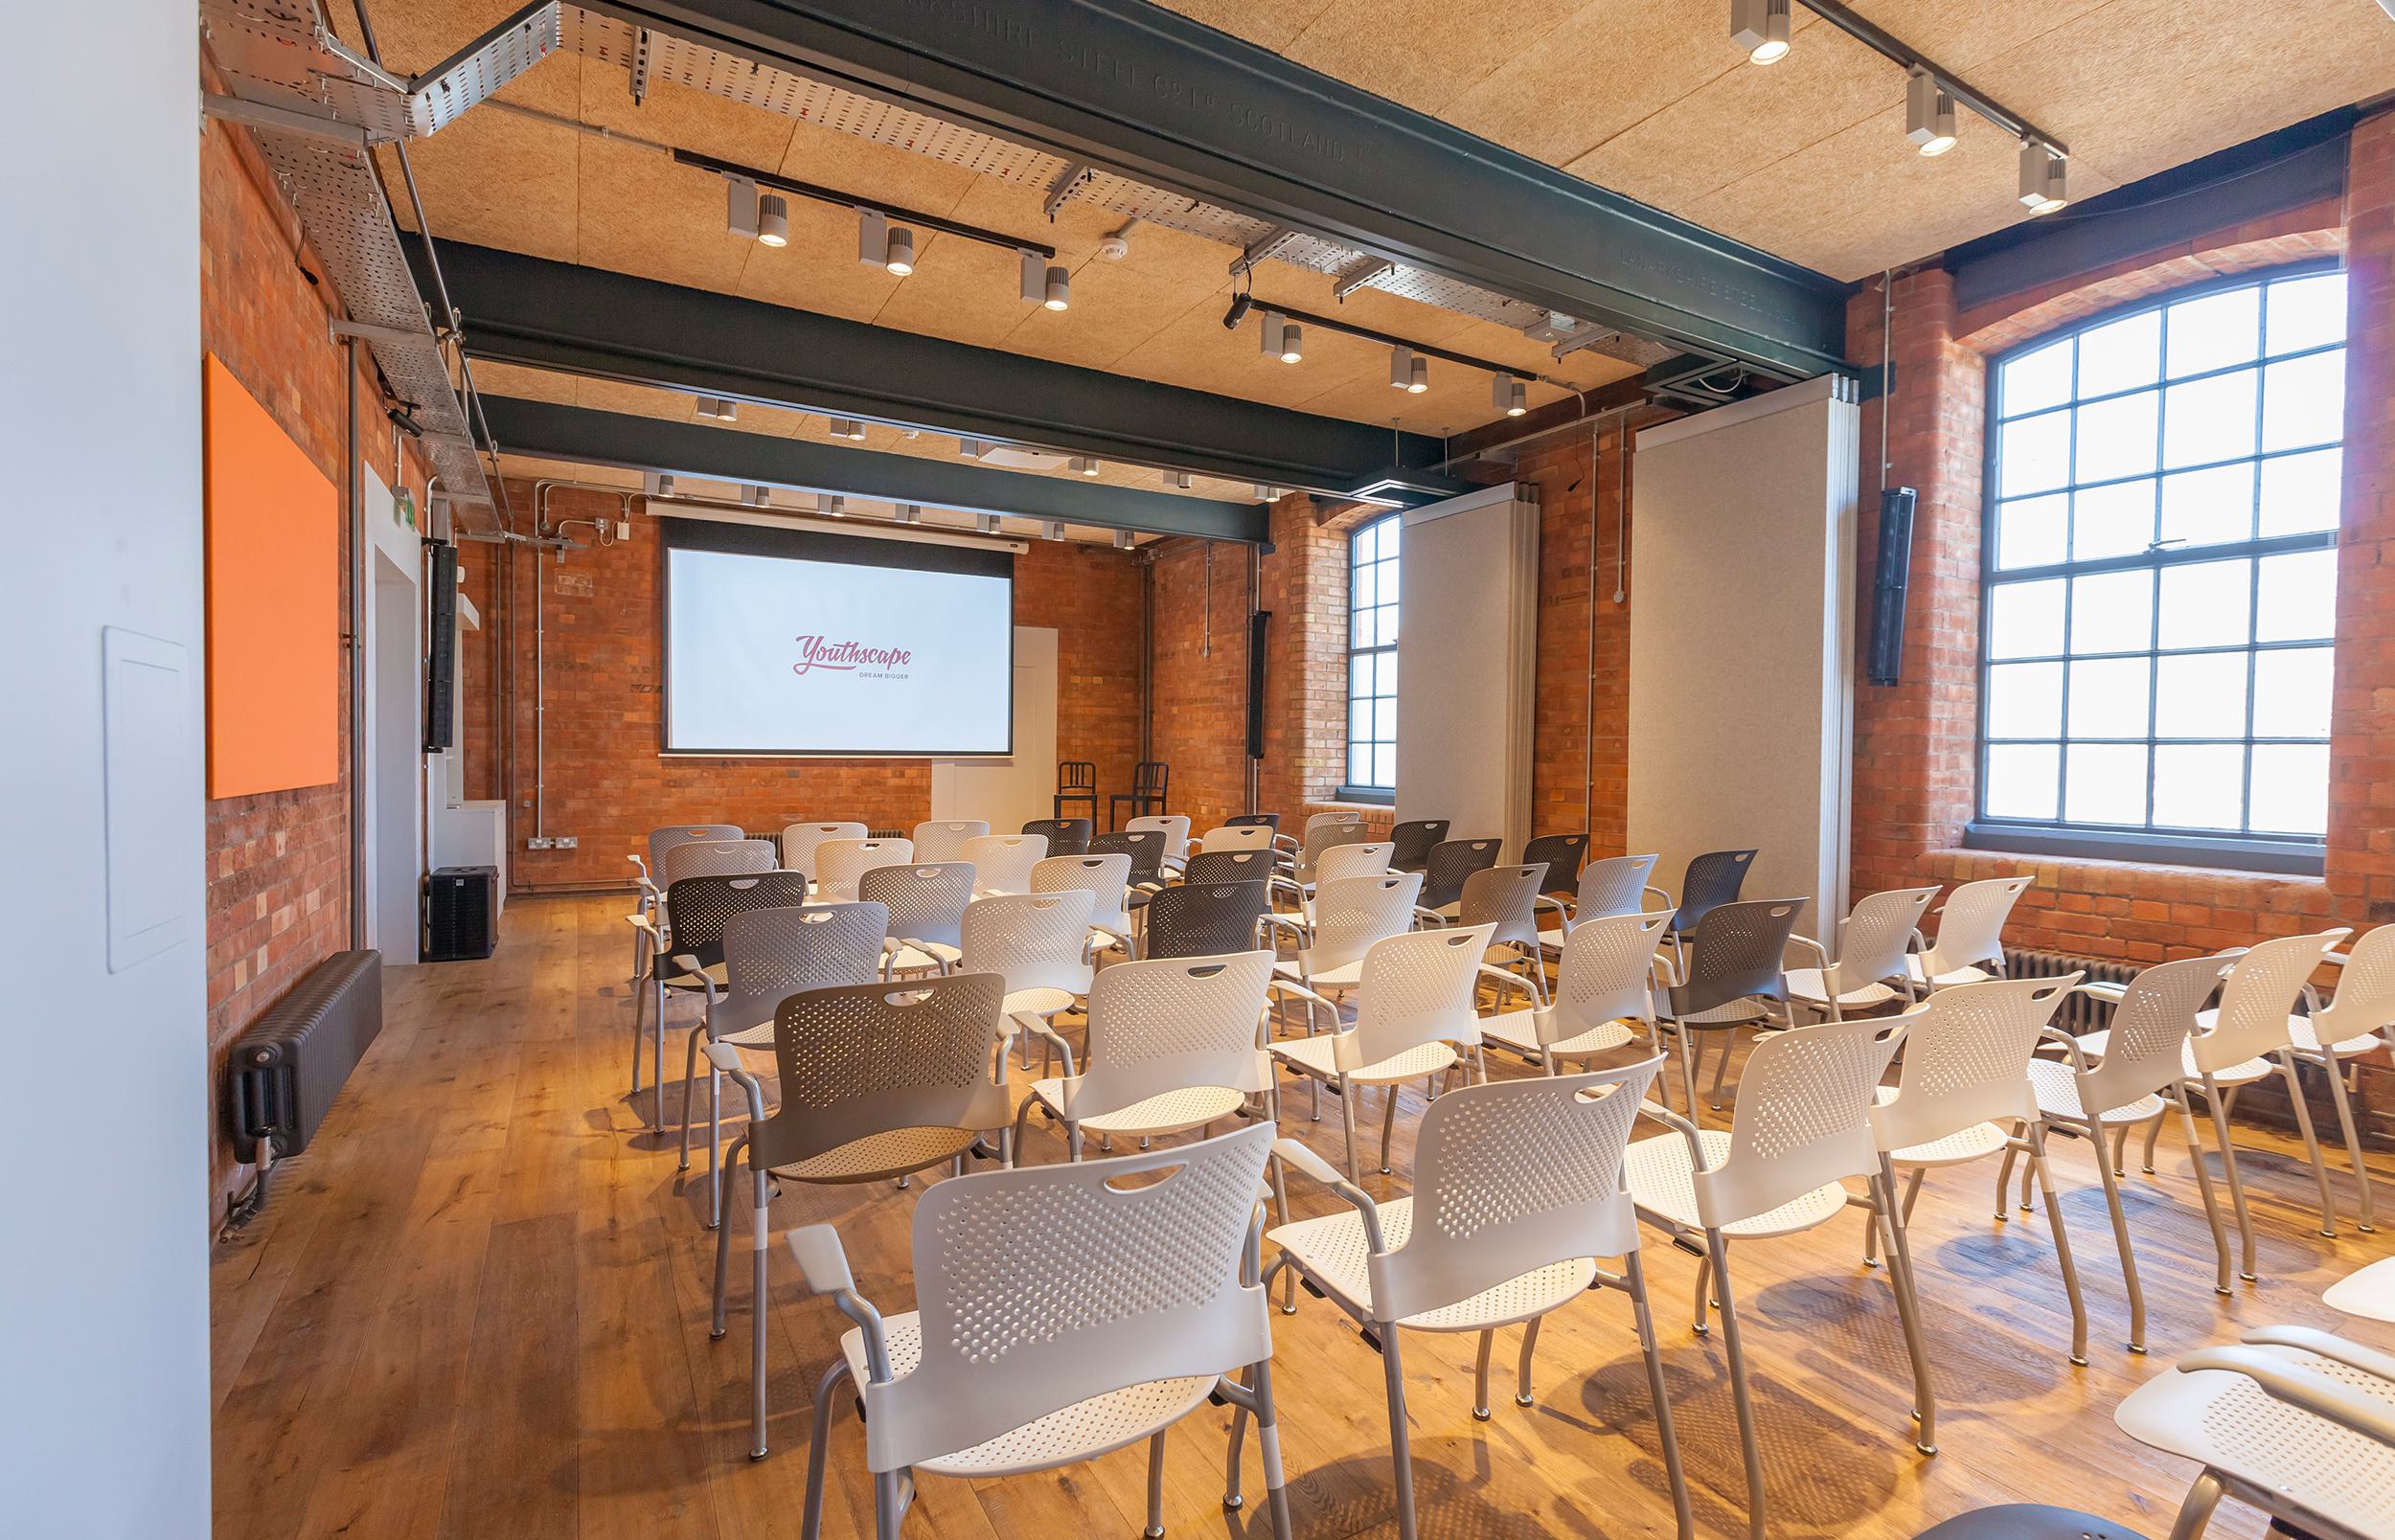 The conference room has space for 100 reception style or 80 theatre style